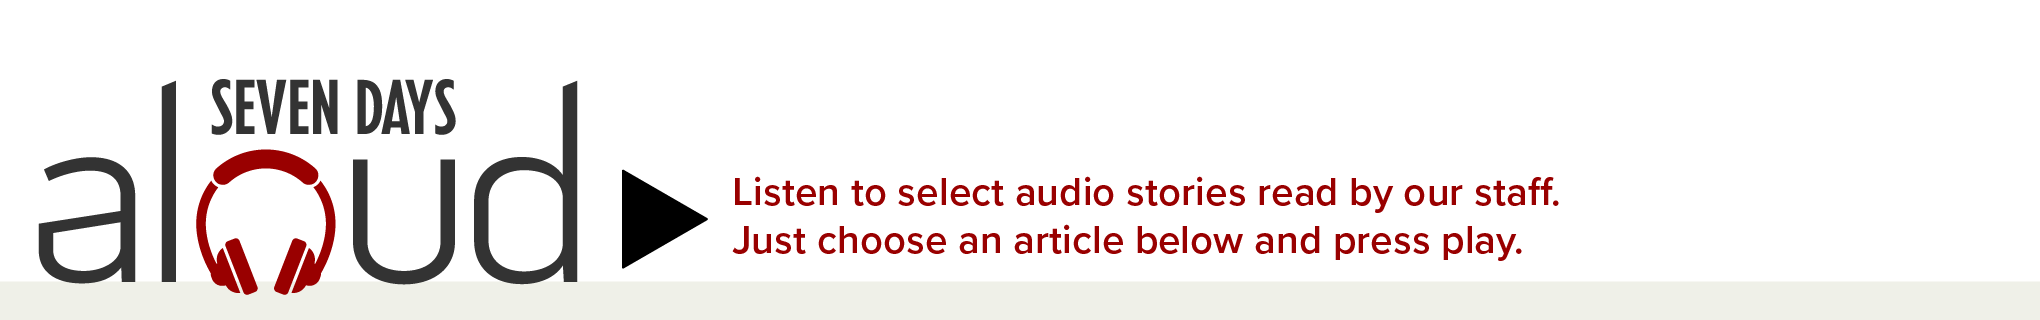 Seven Days Aloud: Listen to select audio stories read by our staff. Just choose an article below and press play.